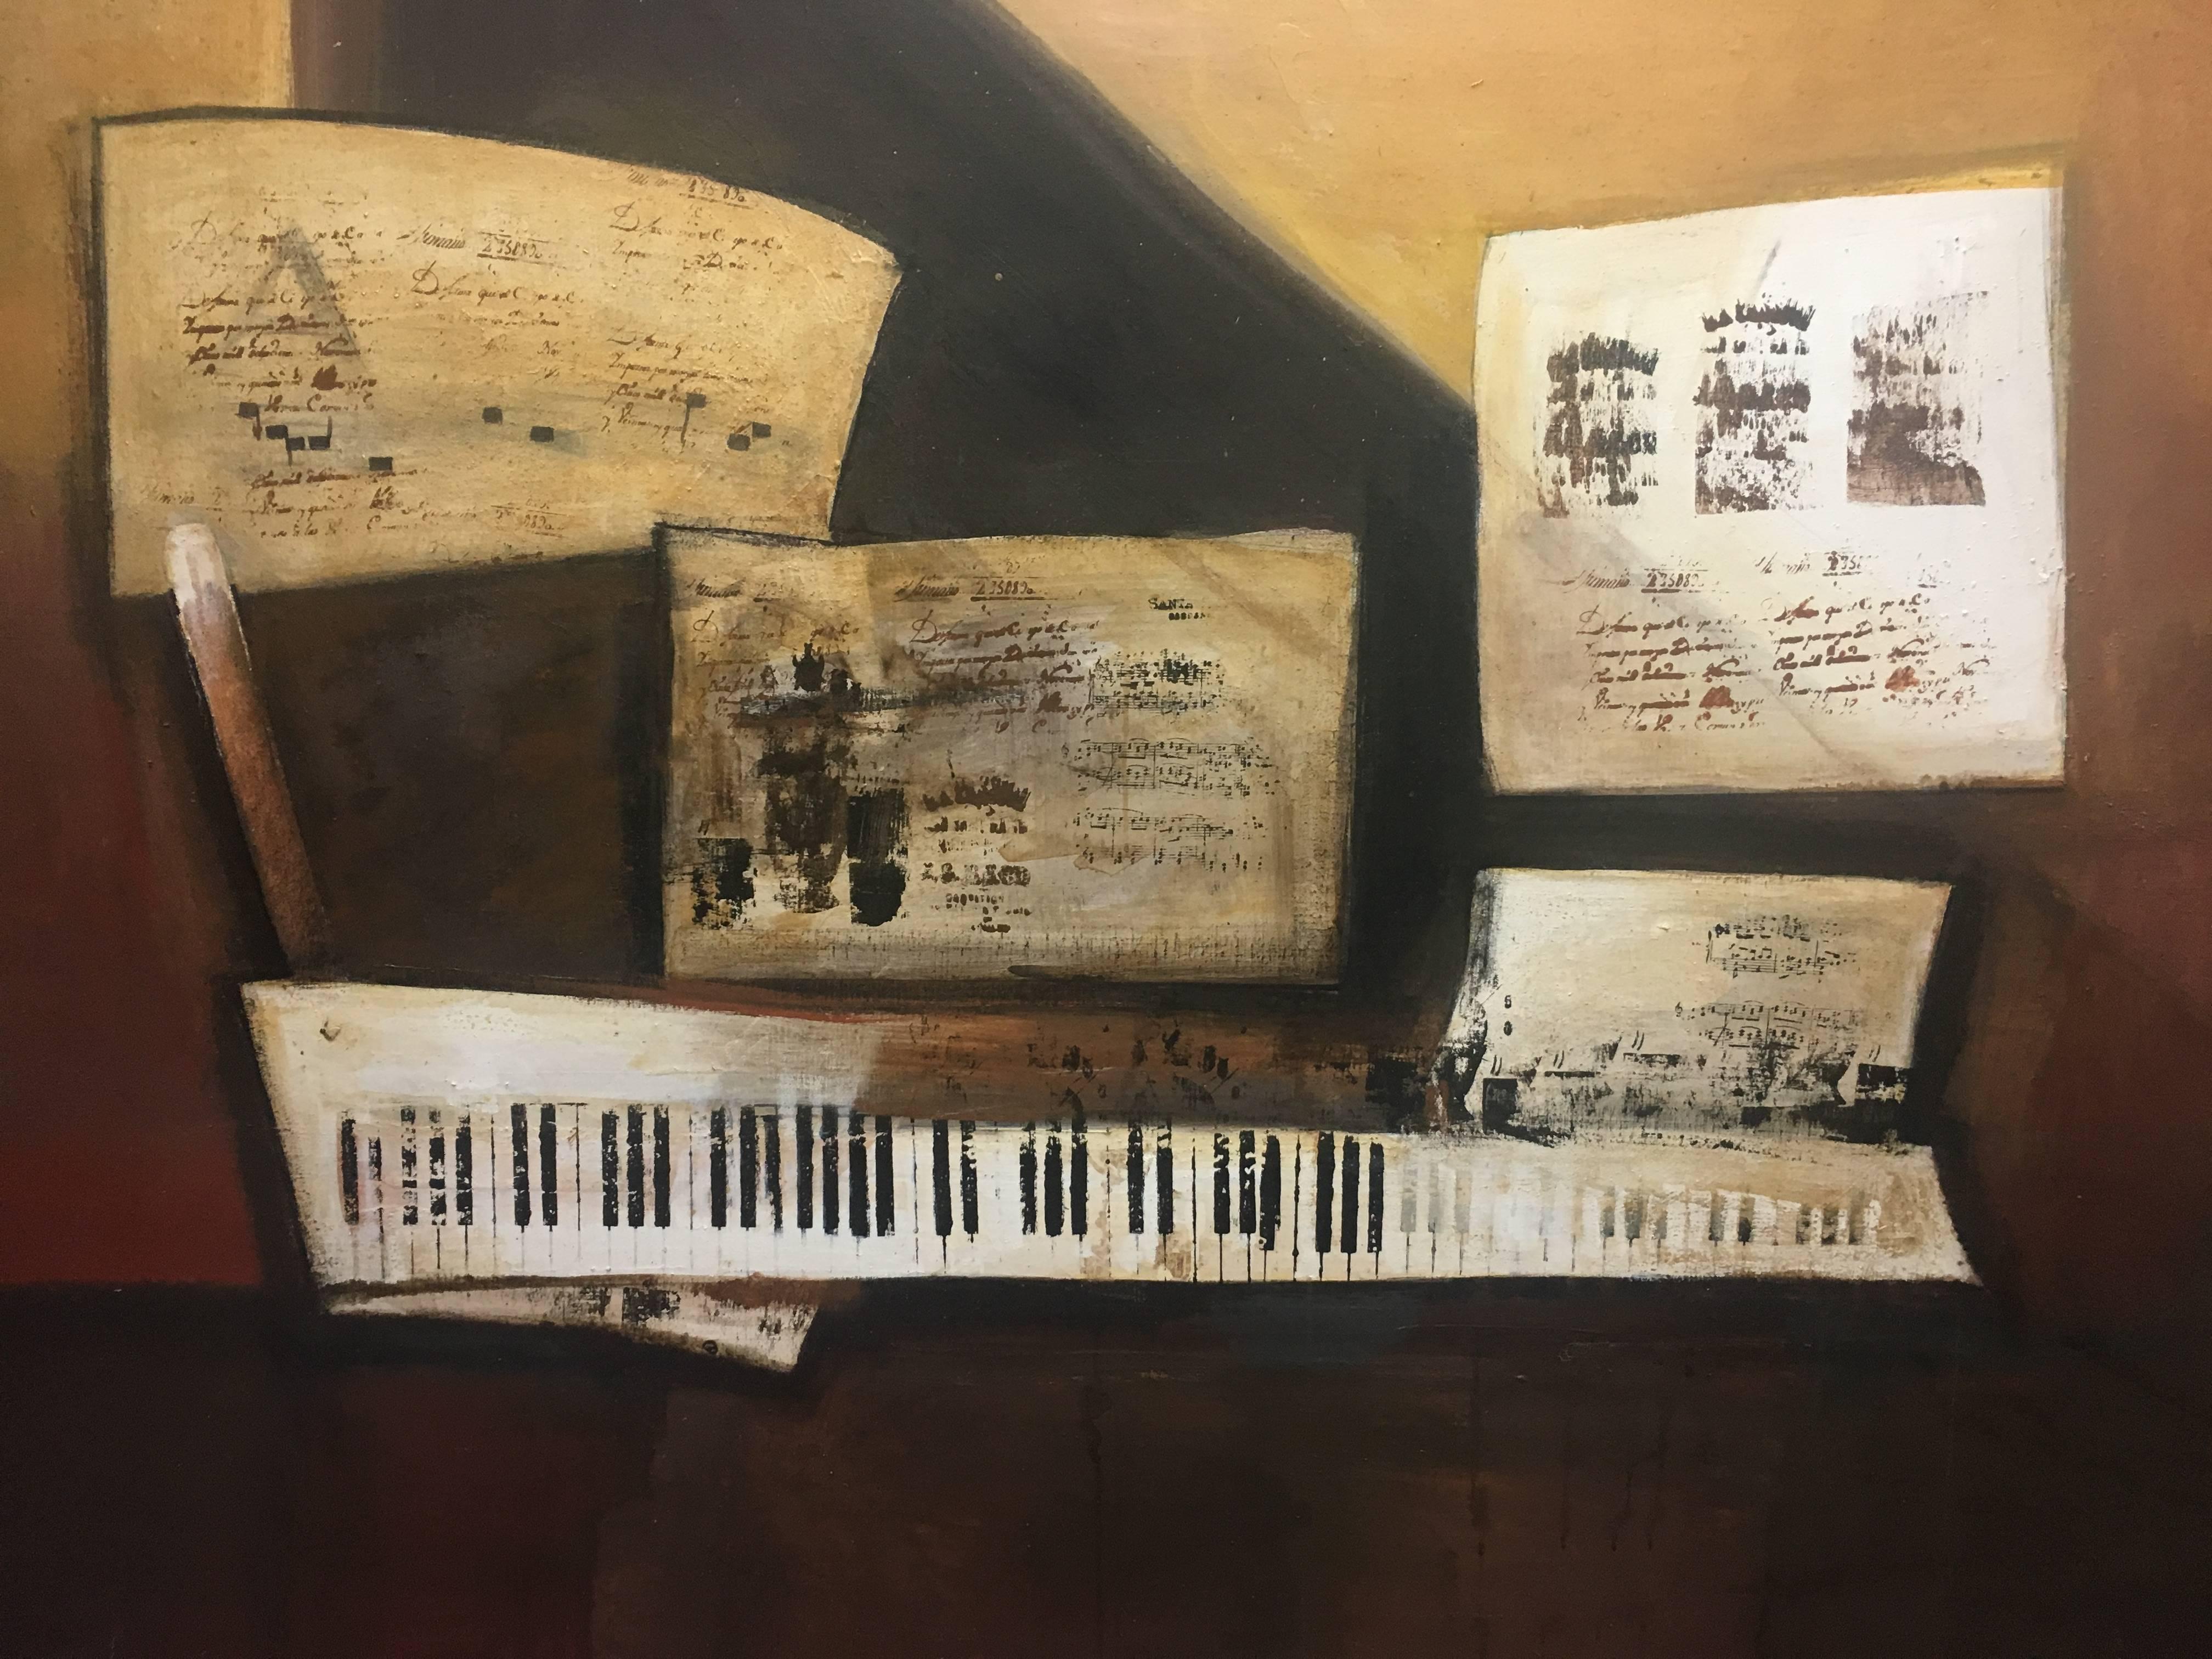 Piano and scores original expressionist acrylic canvas painting
RAVENTÓS Mª Assumpció – (San Sadurní d’Anoia, Barcelona 1930).
Raventos trained at the elite Sant Jordi School of Fine Arts in Barcelona.
Raventós expanded her studies in etching and